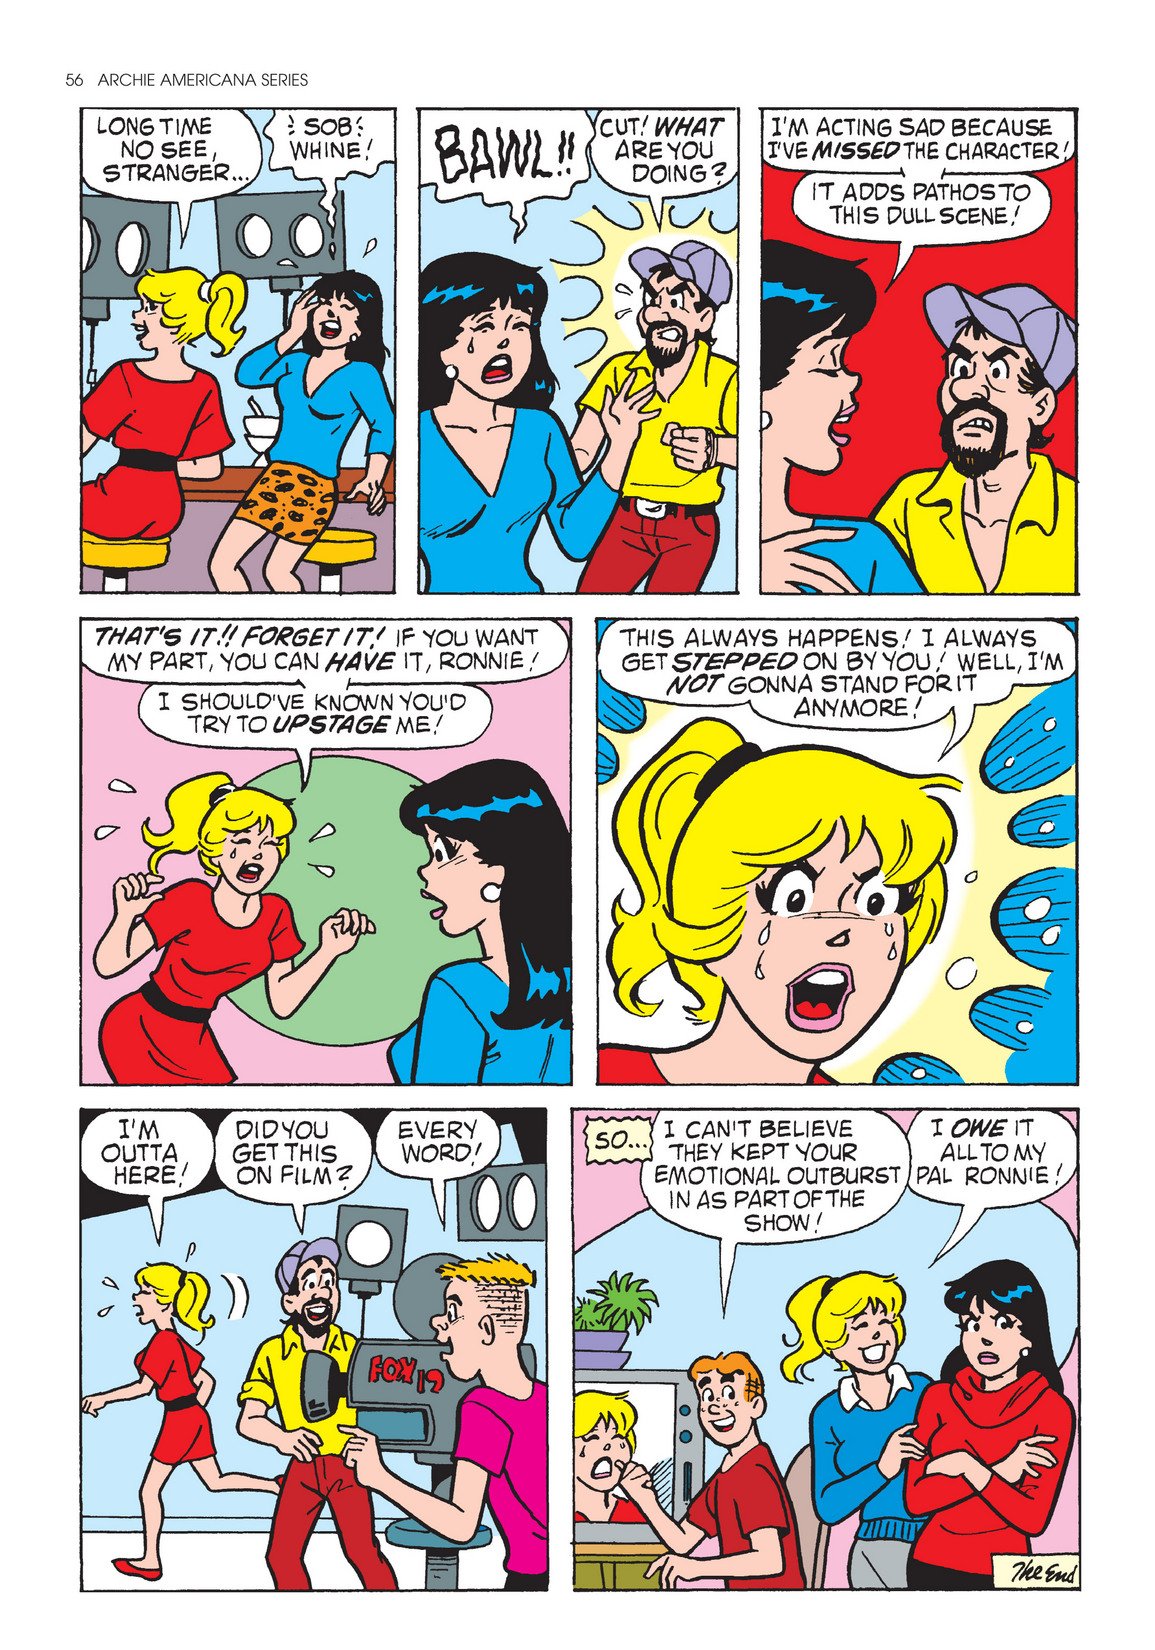 Read online Archie Americana Series comic -  Issue # TPB 9 - 58